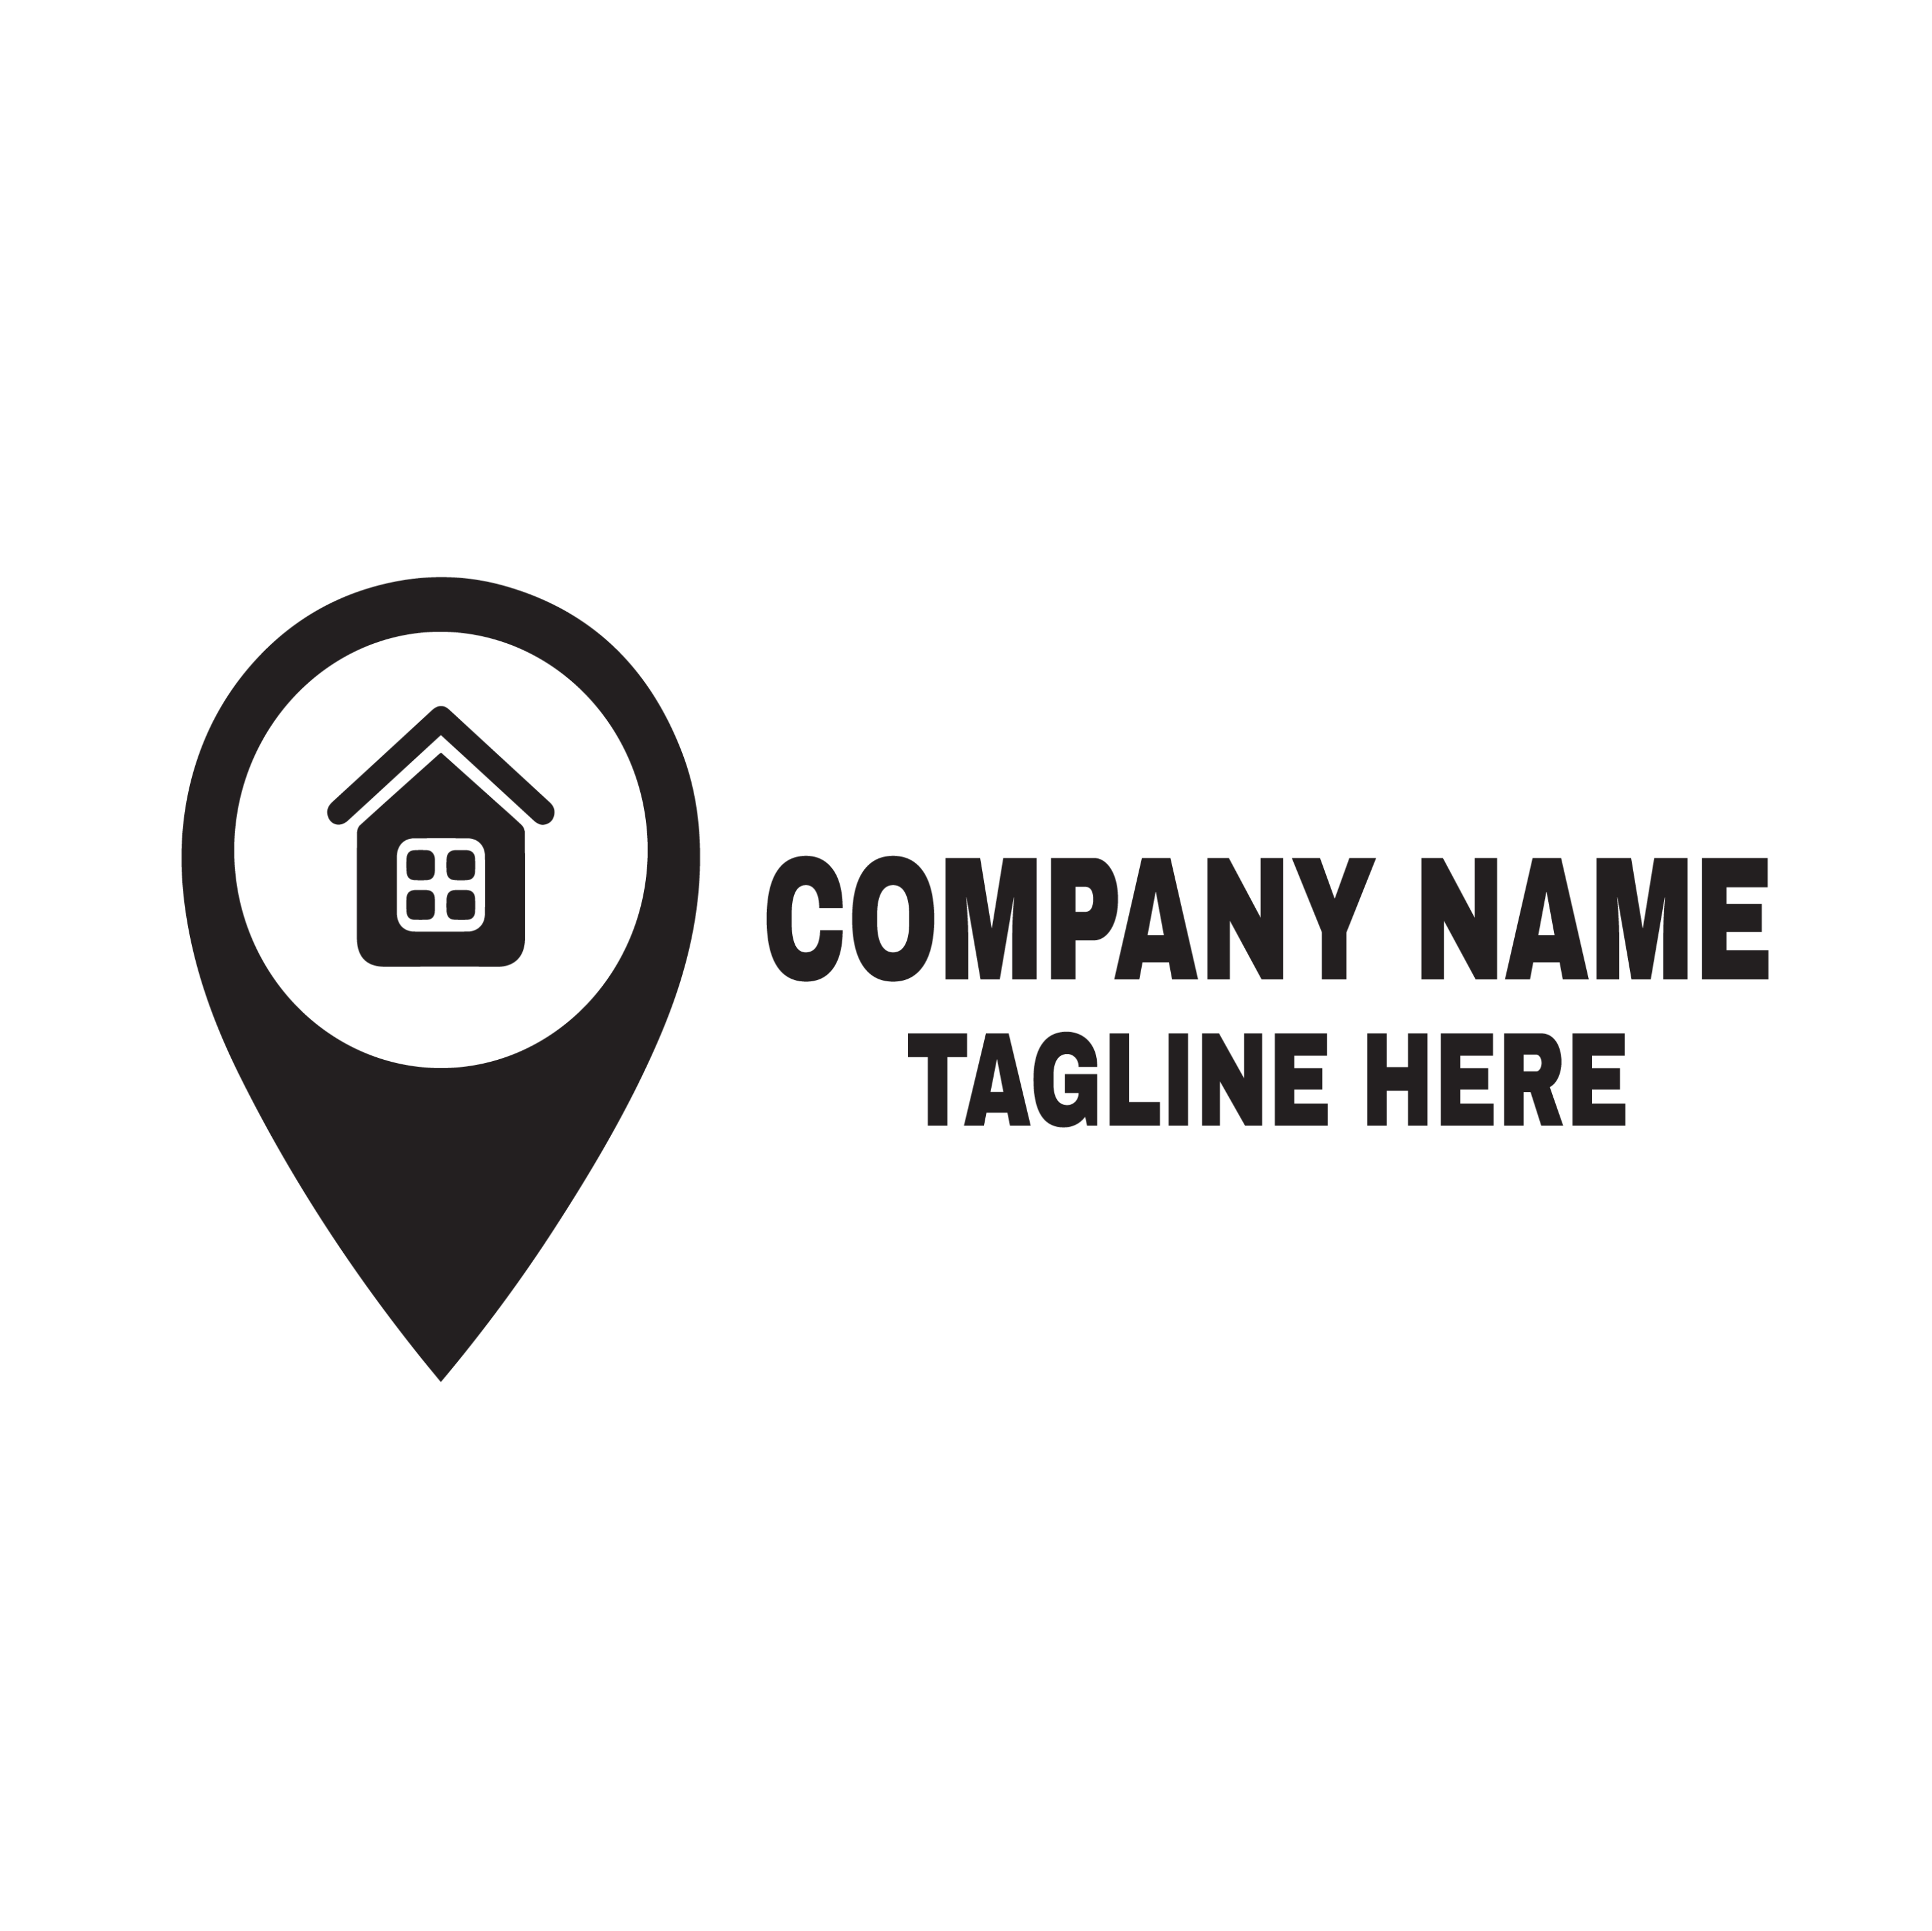 Cool Real Estate & Home Logo Template, black logo on white background.